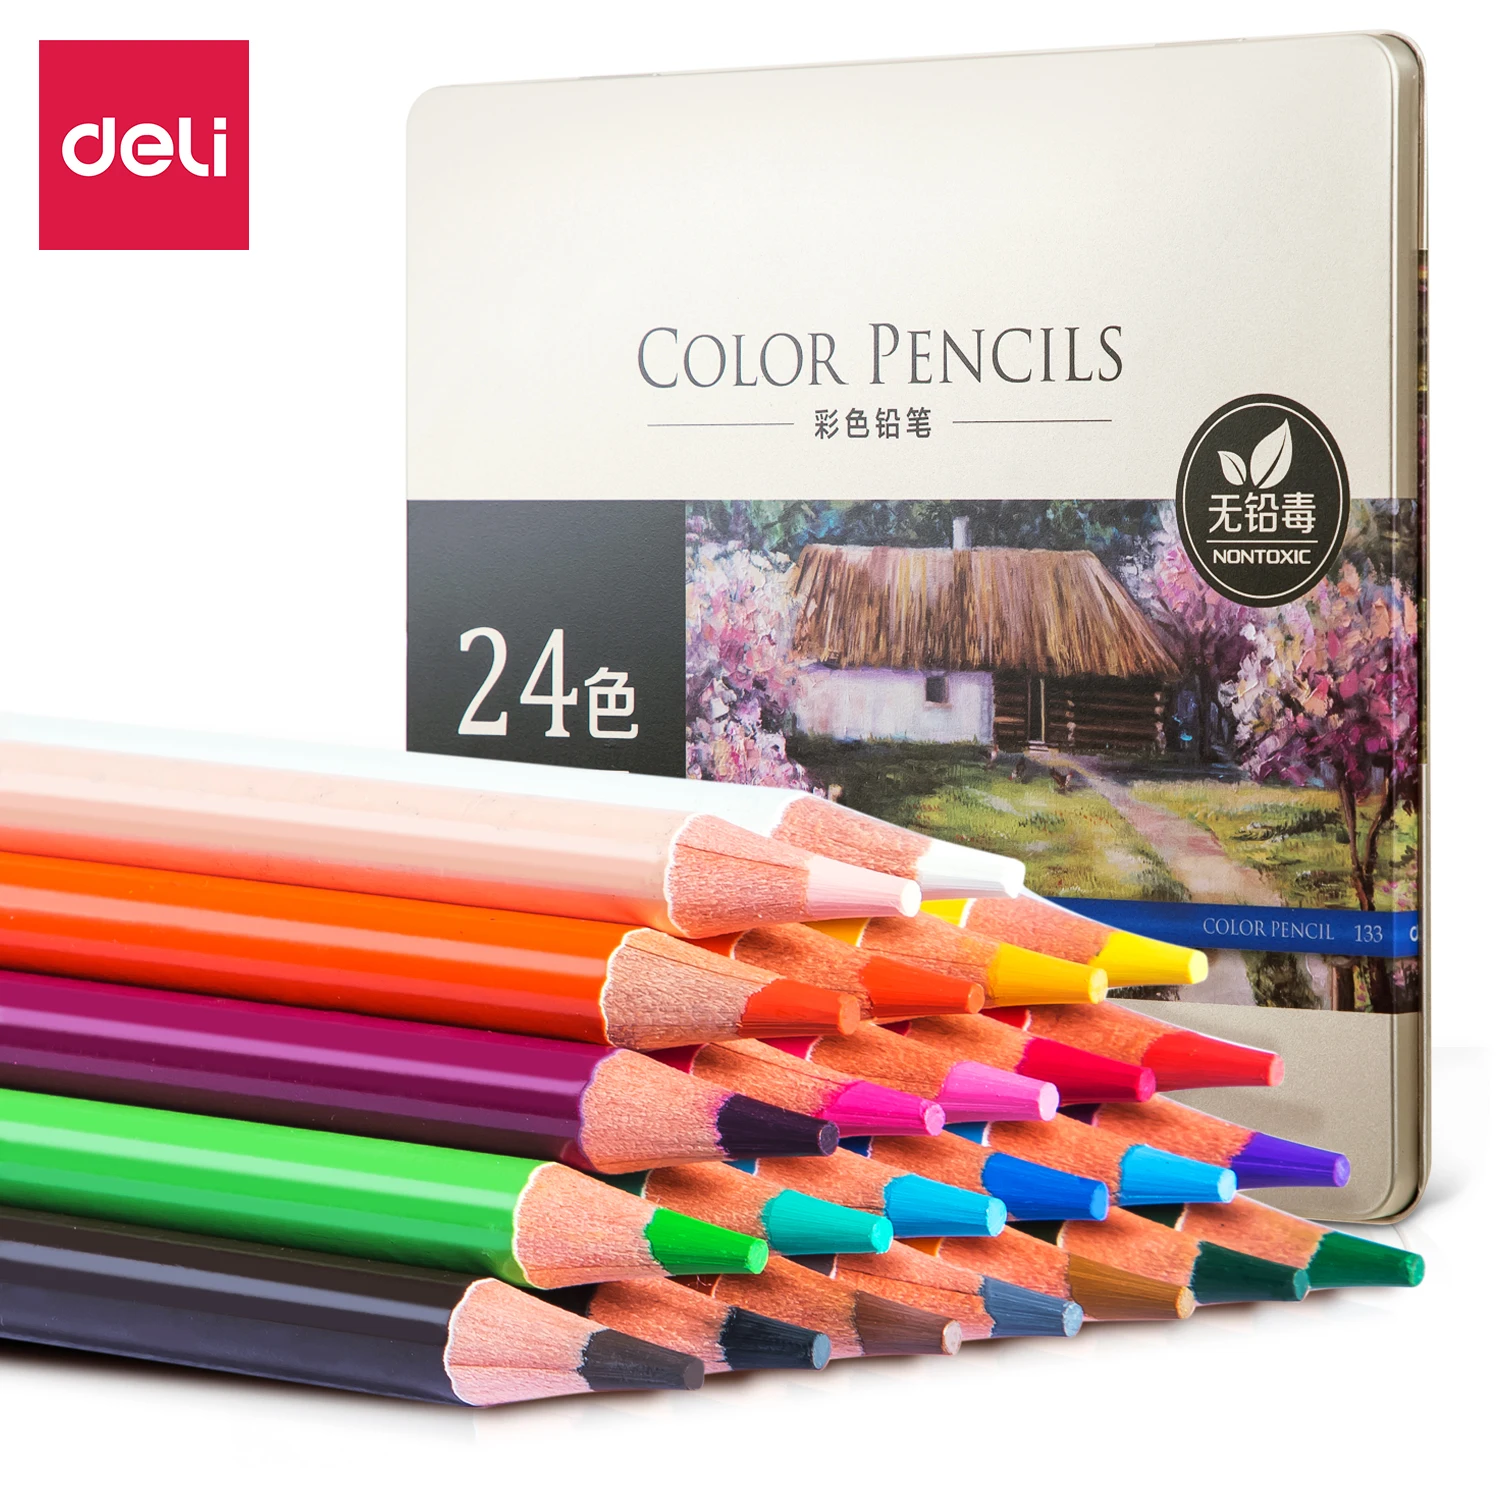 

Deli Oily Lead 24 Colors Iron Box Classic Colored Pencils Suitable For Painting Design Sketching Comic Creation Etc